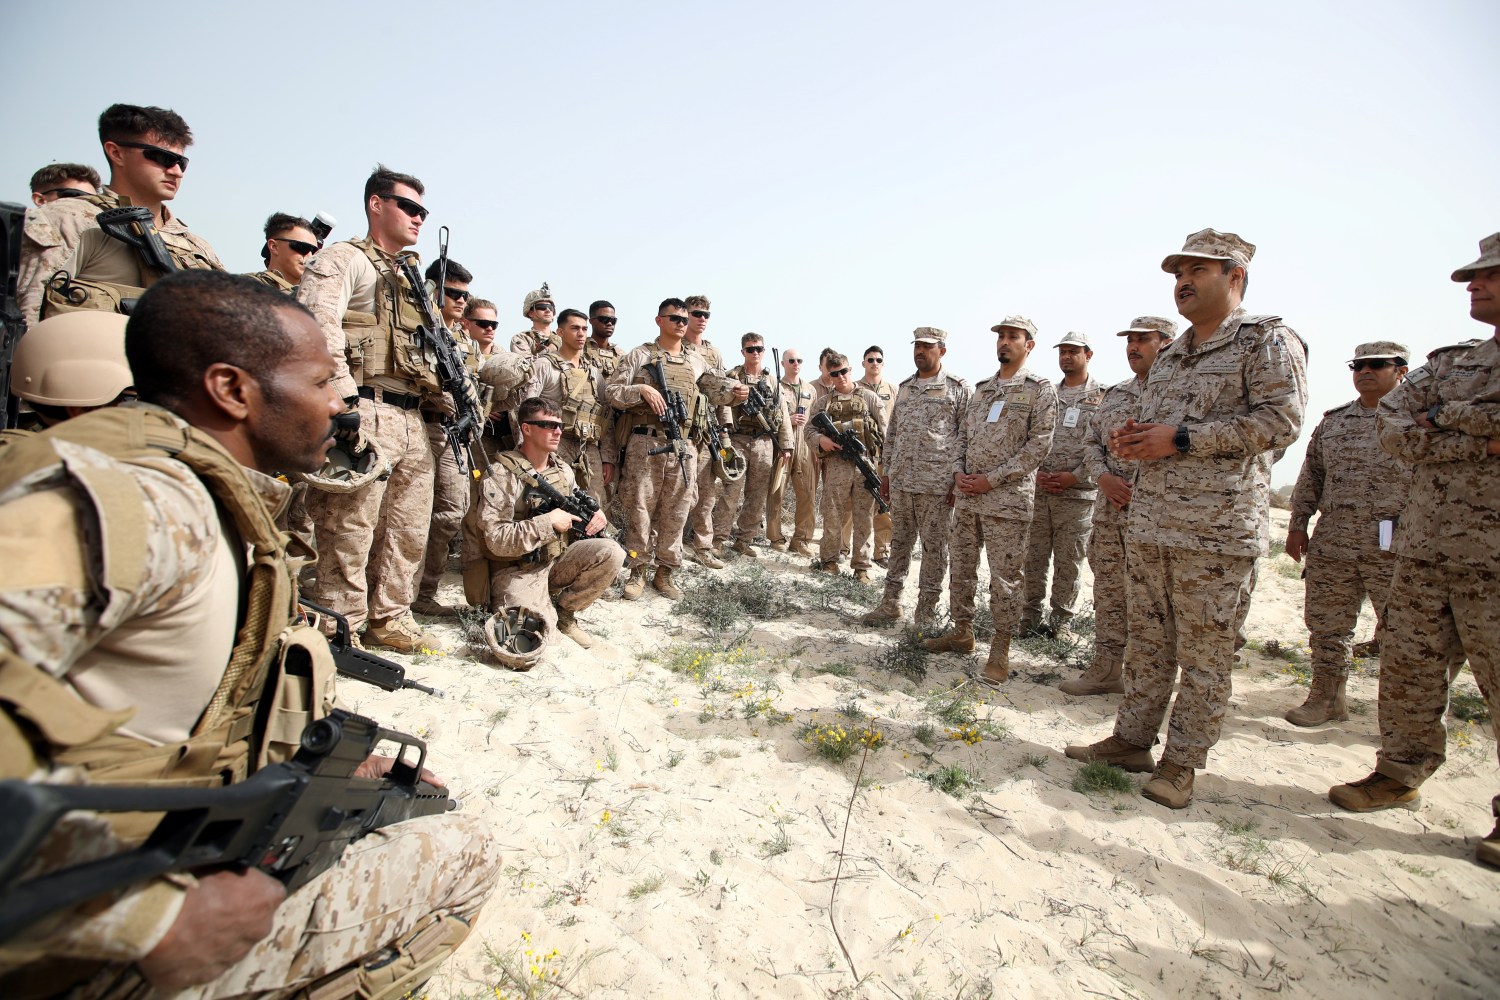 Admiral Ali Saeed Al Shehri speaks with soldiers during mixed maritime exercise with U.S. Navy and Saudi Royal Navy, at Saudi Military Port, Ras Al Ghar, Eastern Province, in Jubail, Saudi Arabia February 26, 2020. REUTERS/Hamad I Mohammed